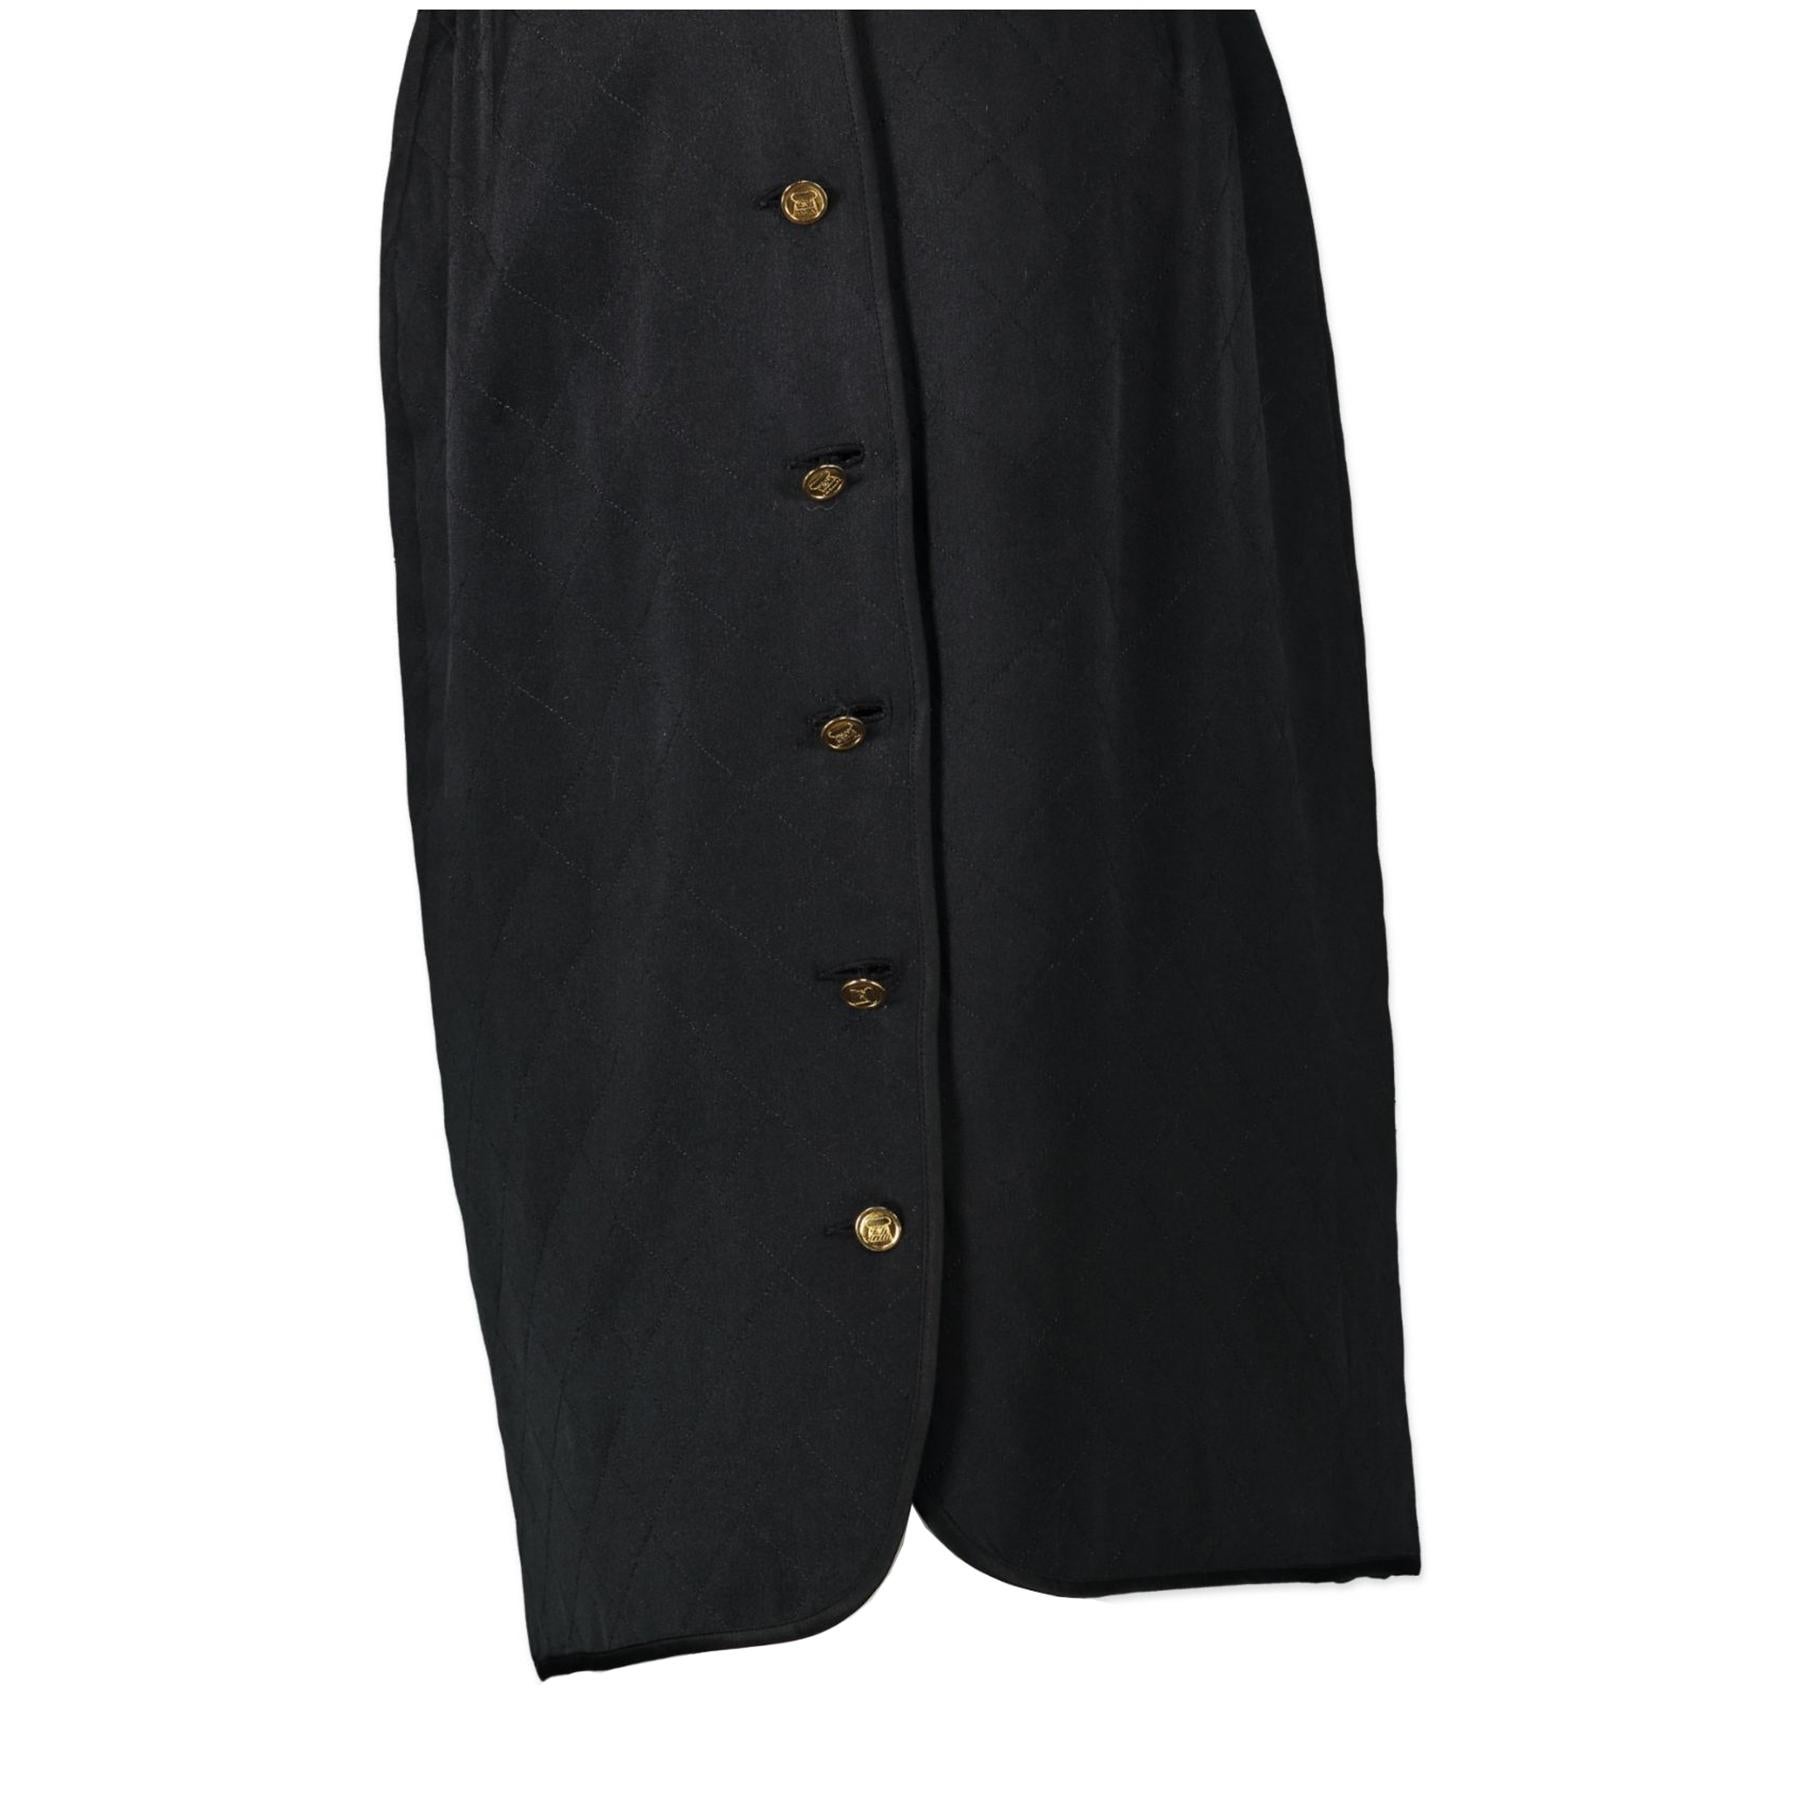 Very good preloved condition

Chanel Black Quilted Satin Skirt 

This gorgeous quilted Chanel skirt will be the perfect addition to your closet. It's a classic piece but the silk fabric gives it a shiny twist. The skirt also features gold buttons